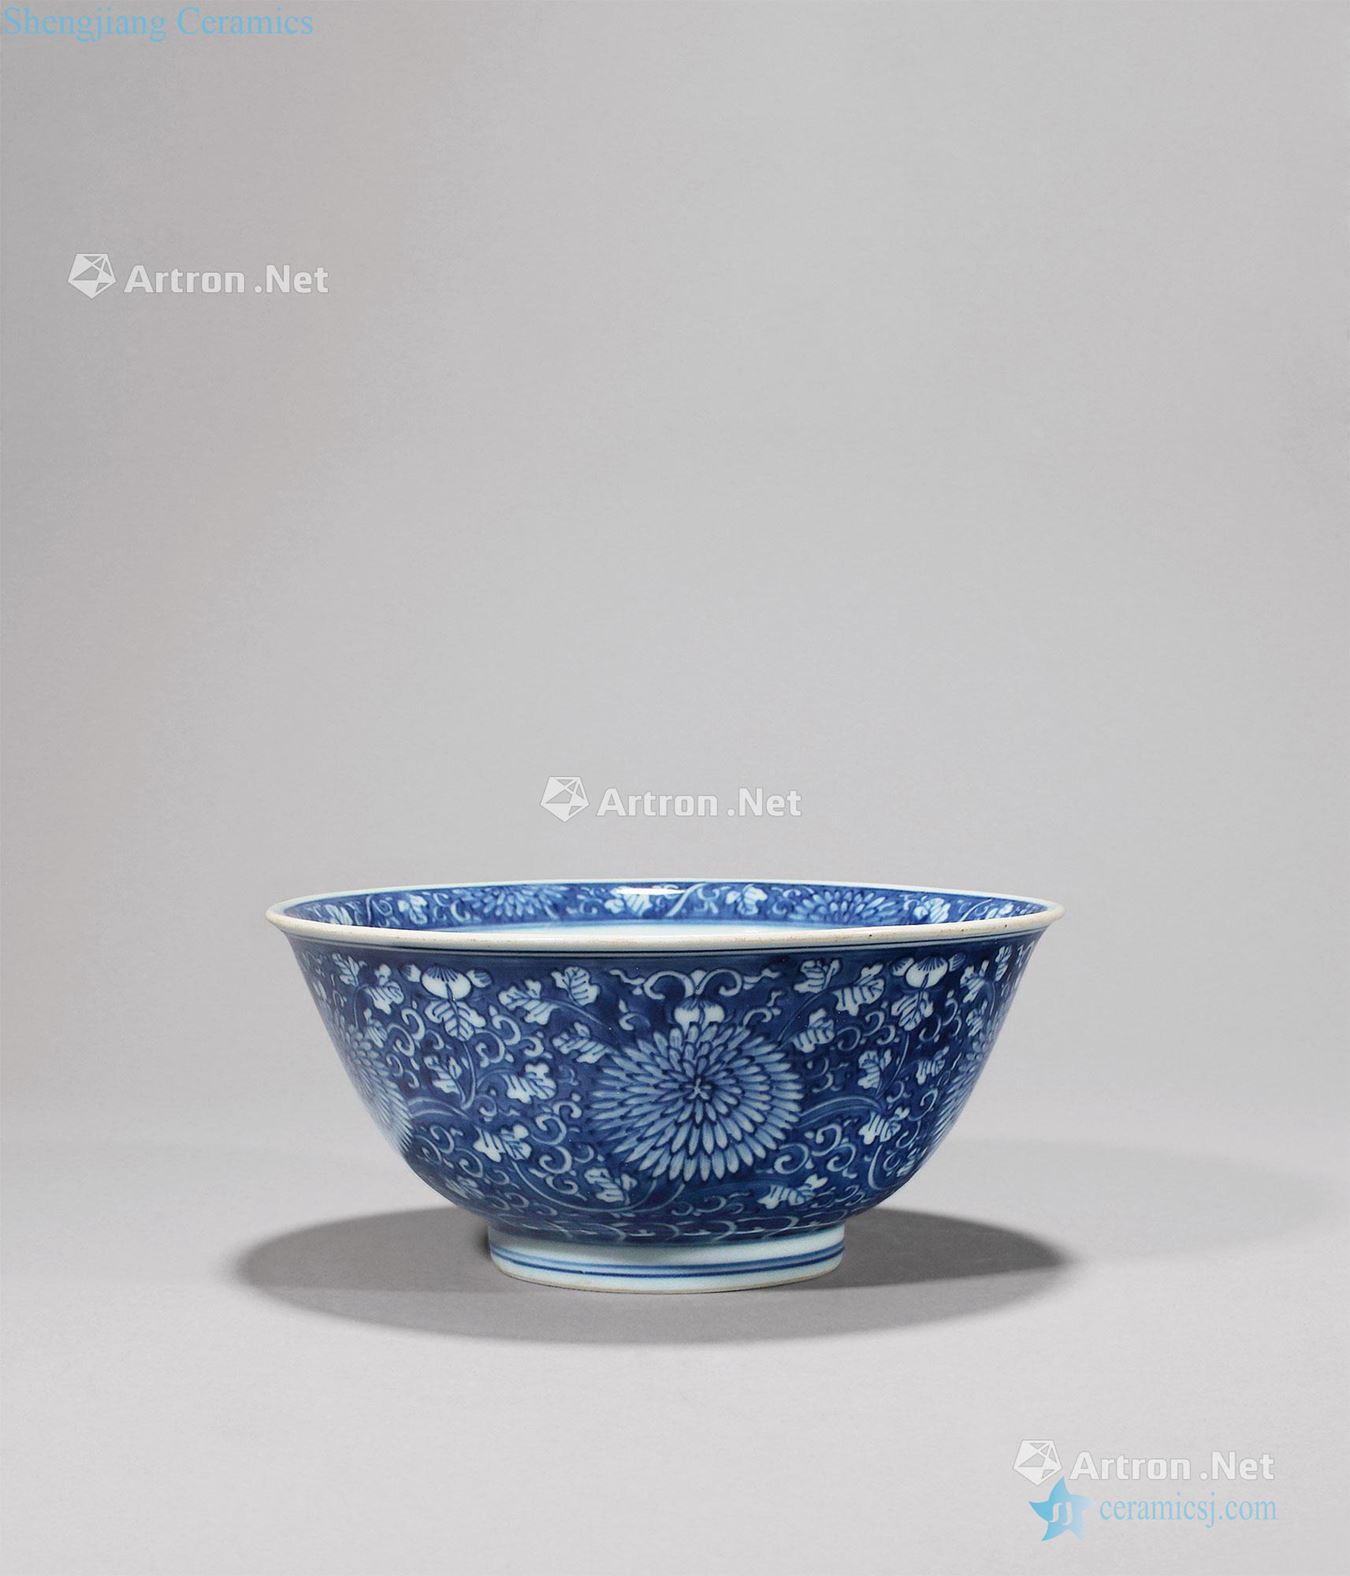 Clear blue and white space around chrysanthemum green-splashed bowls